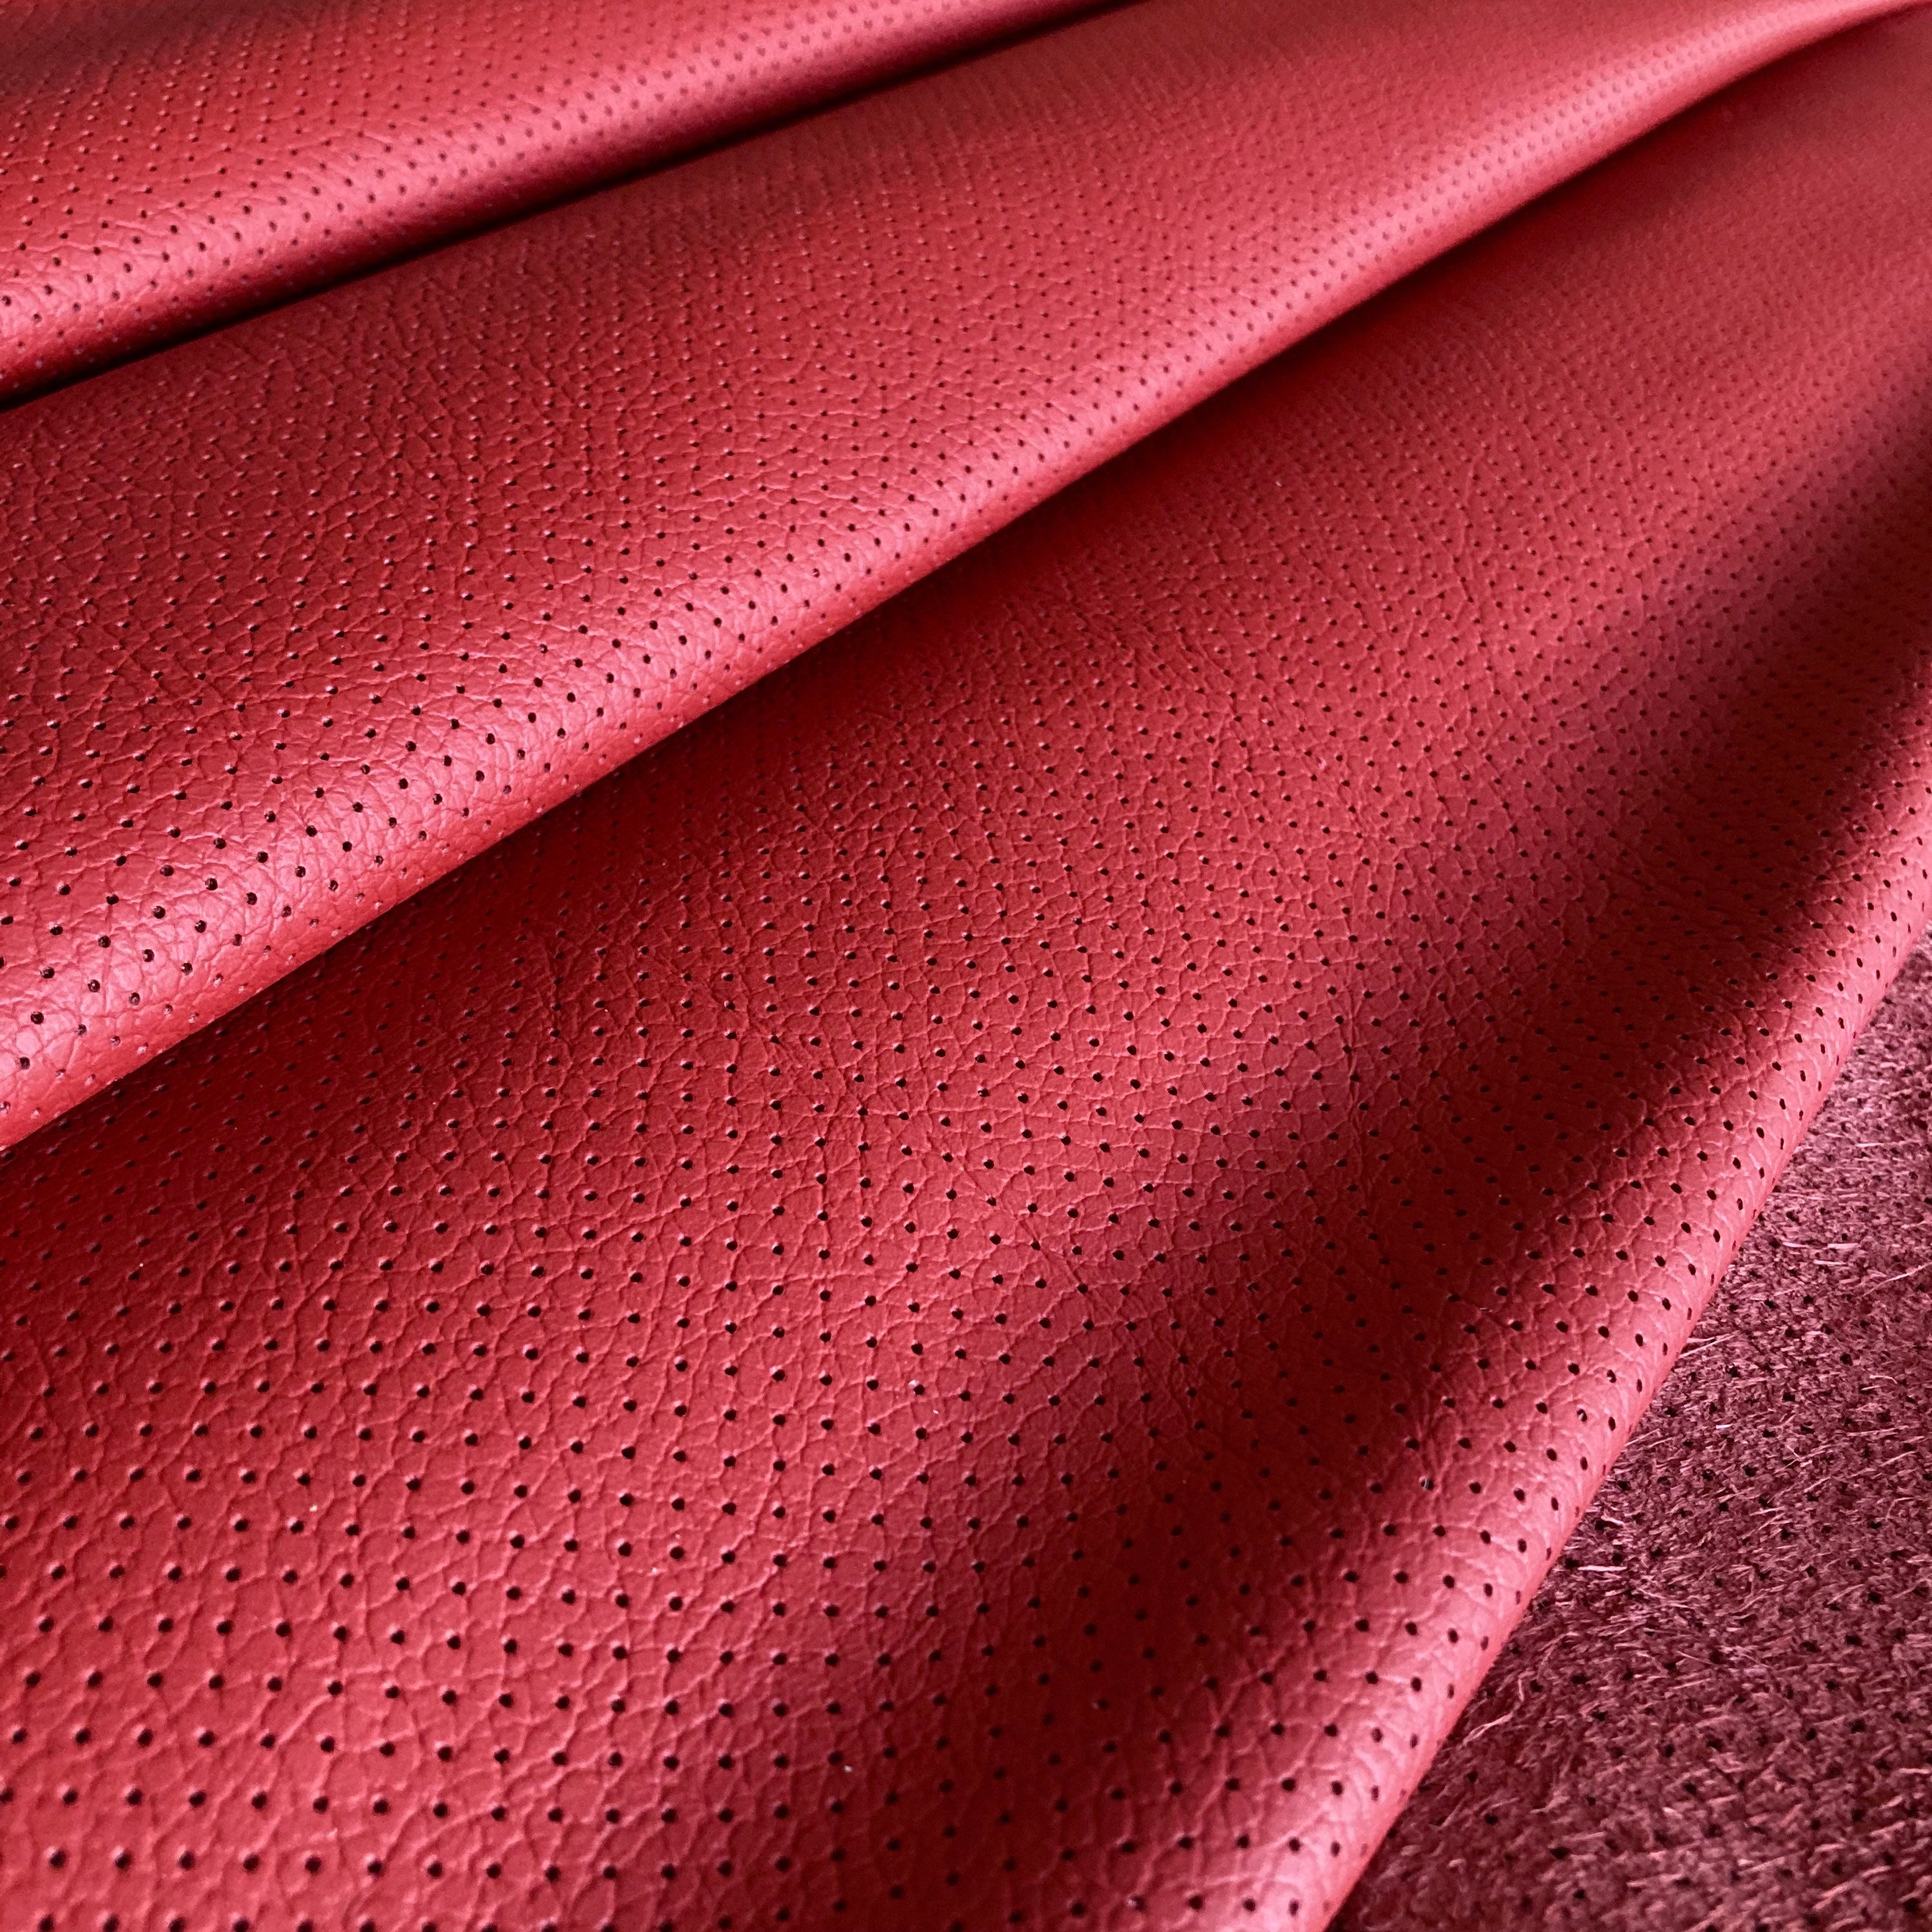 MADEIRA RED COLOR Italian perforated leather sheets Genuine leather piece Automotive upholstery cowhides Leather for crafting